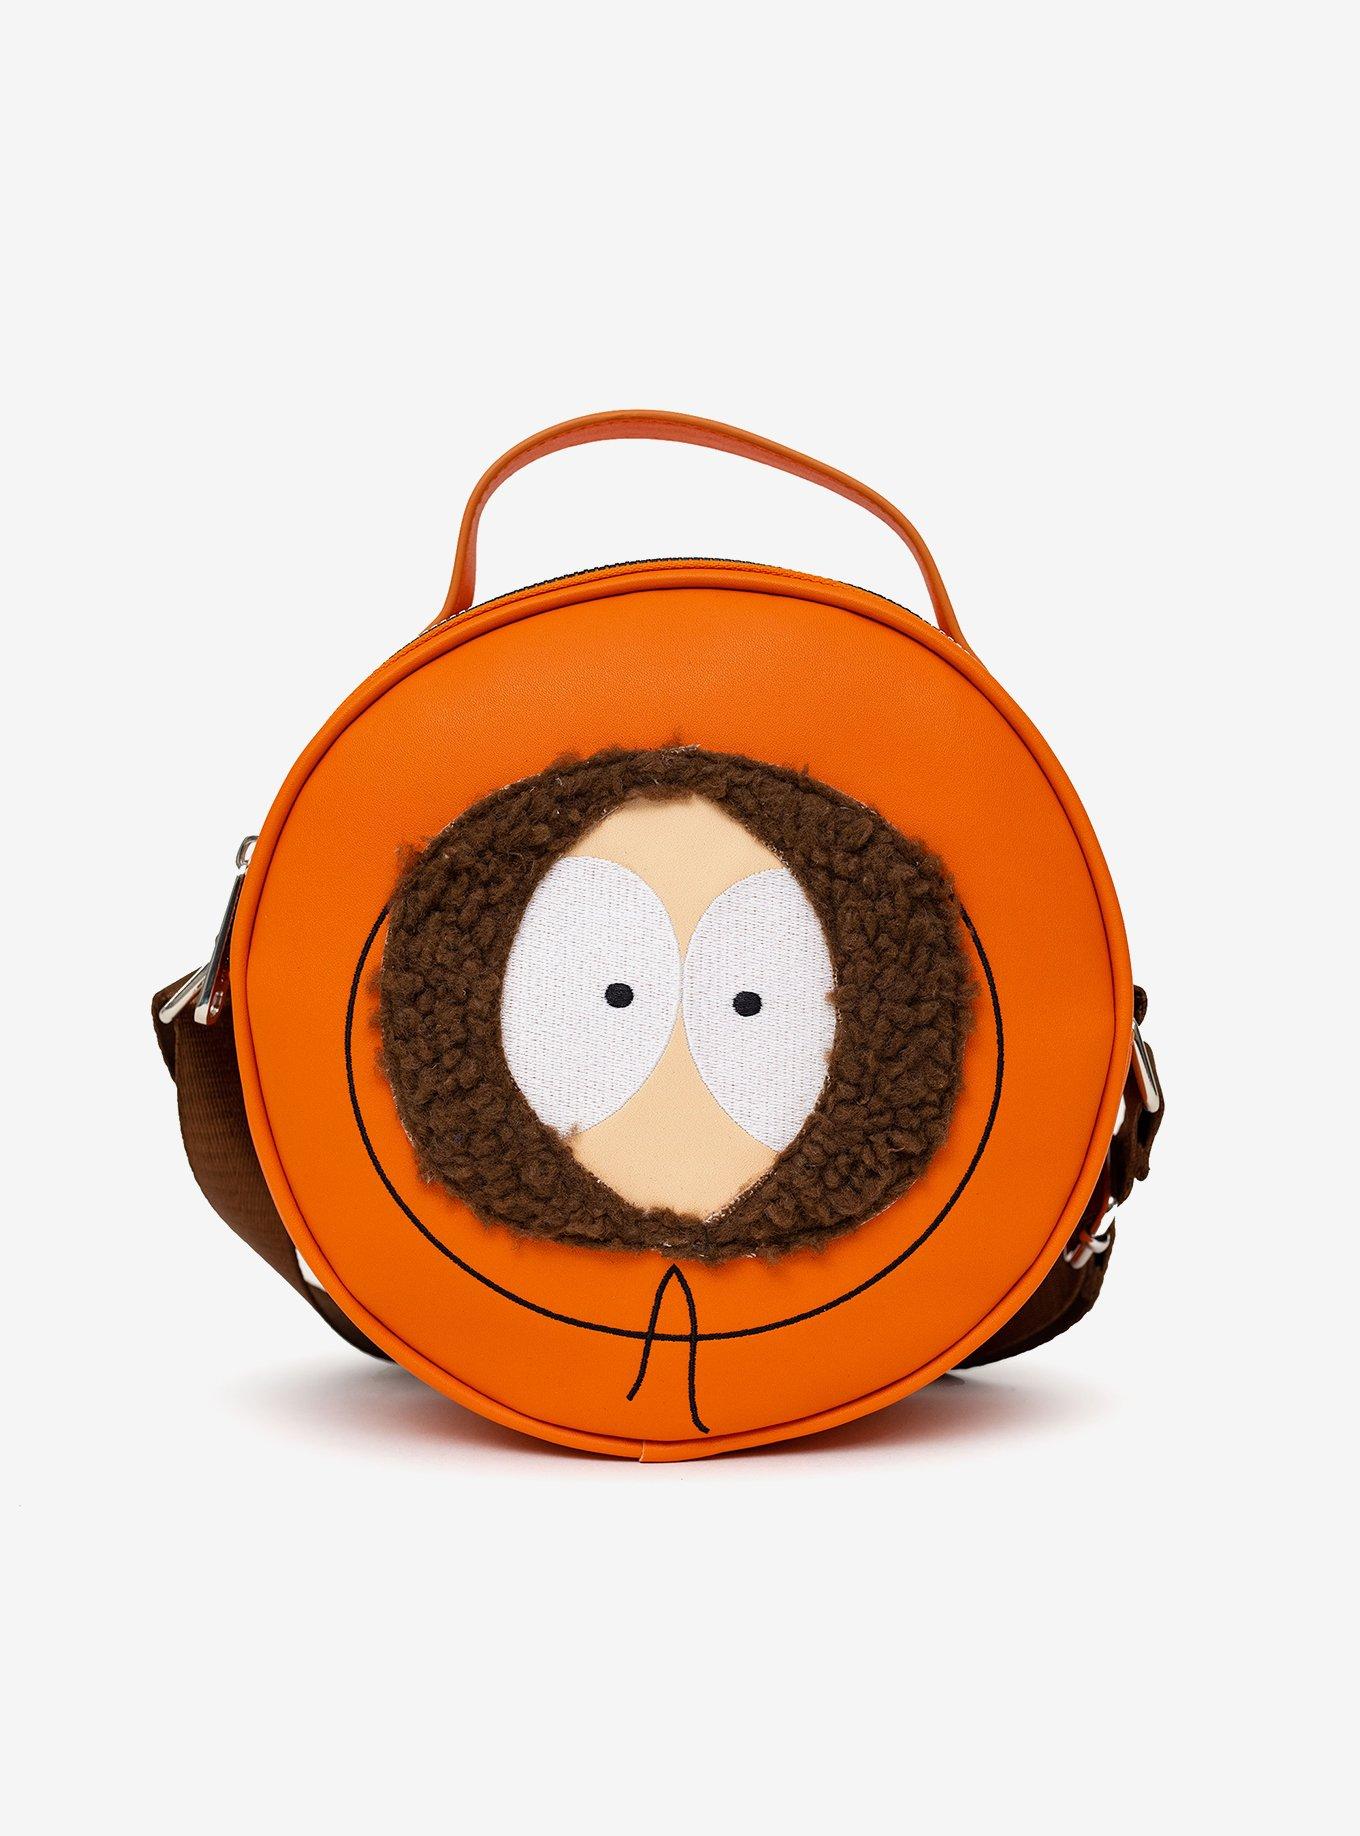 Loungefly Owl Purse Crossbody Embroidered Owl Bag Circle Eyes Gold Owl Purse